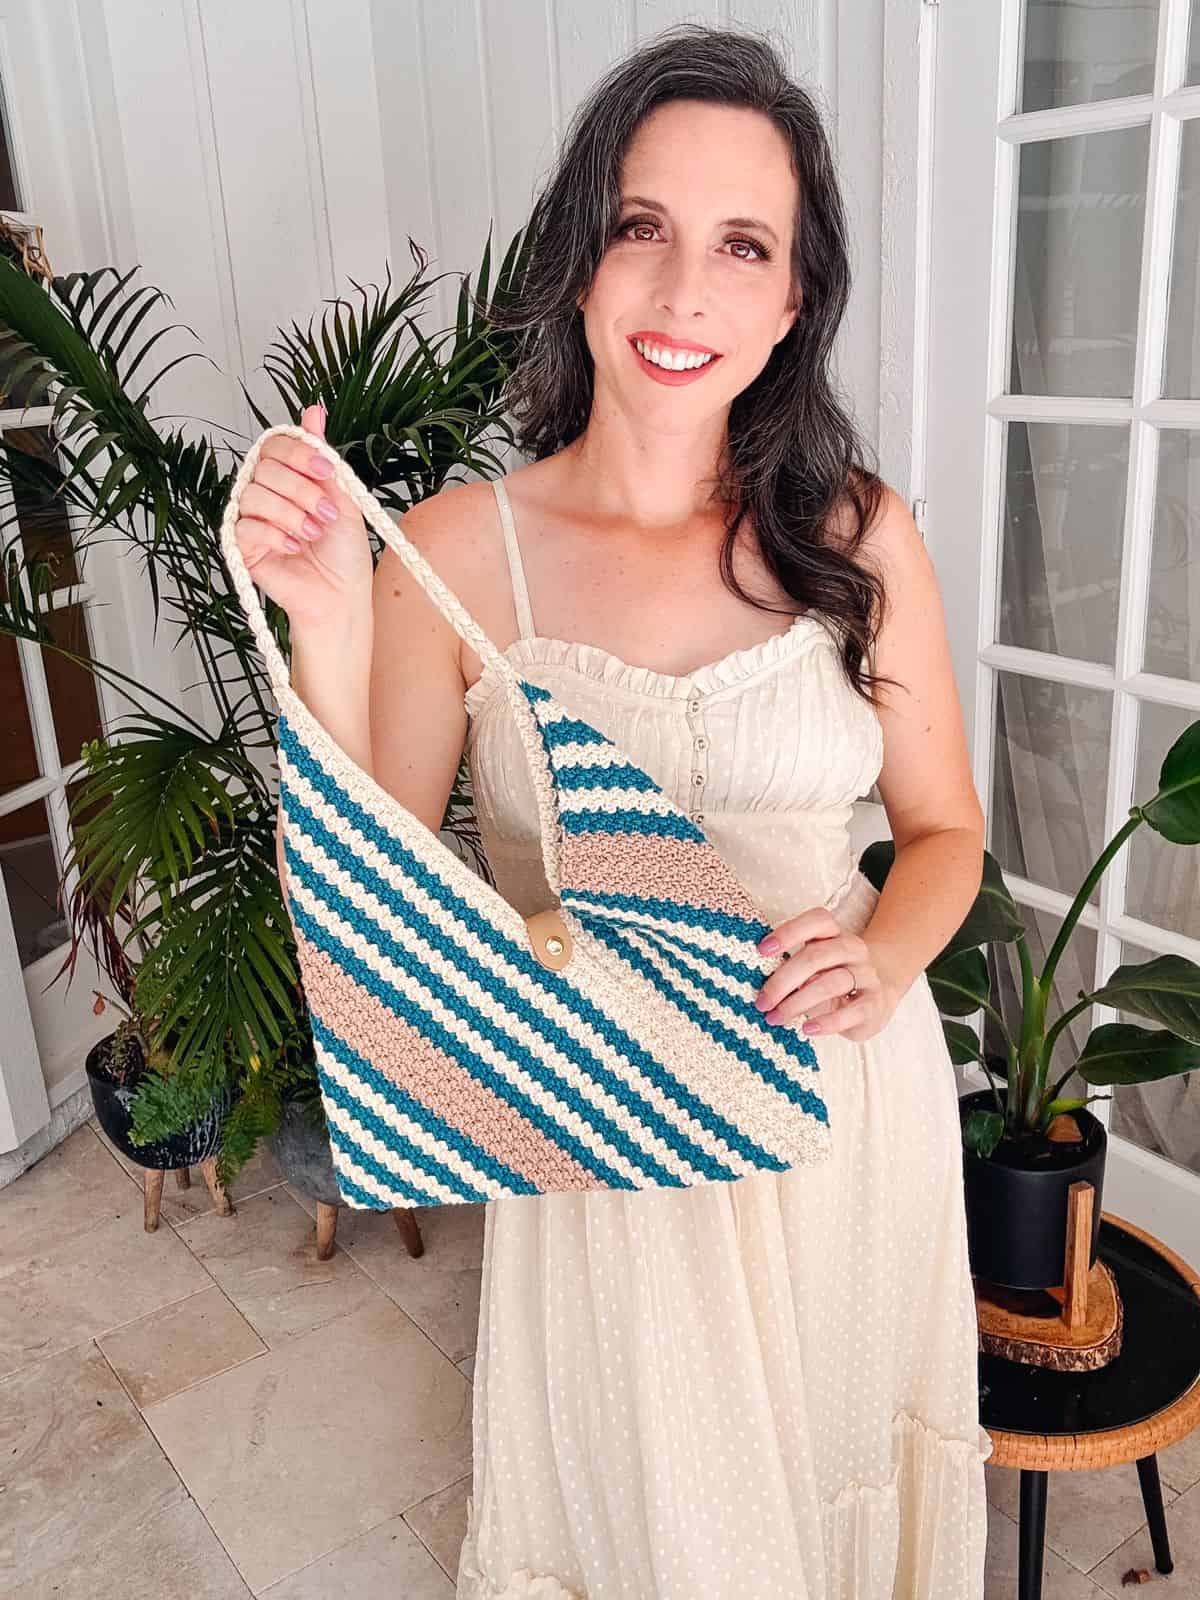 A woman in a cream dress smiles while holding a blue, white, and beige striped woven bag in a room with plants.